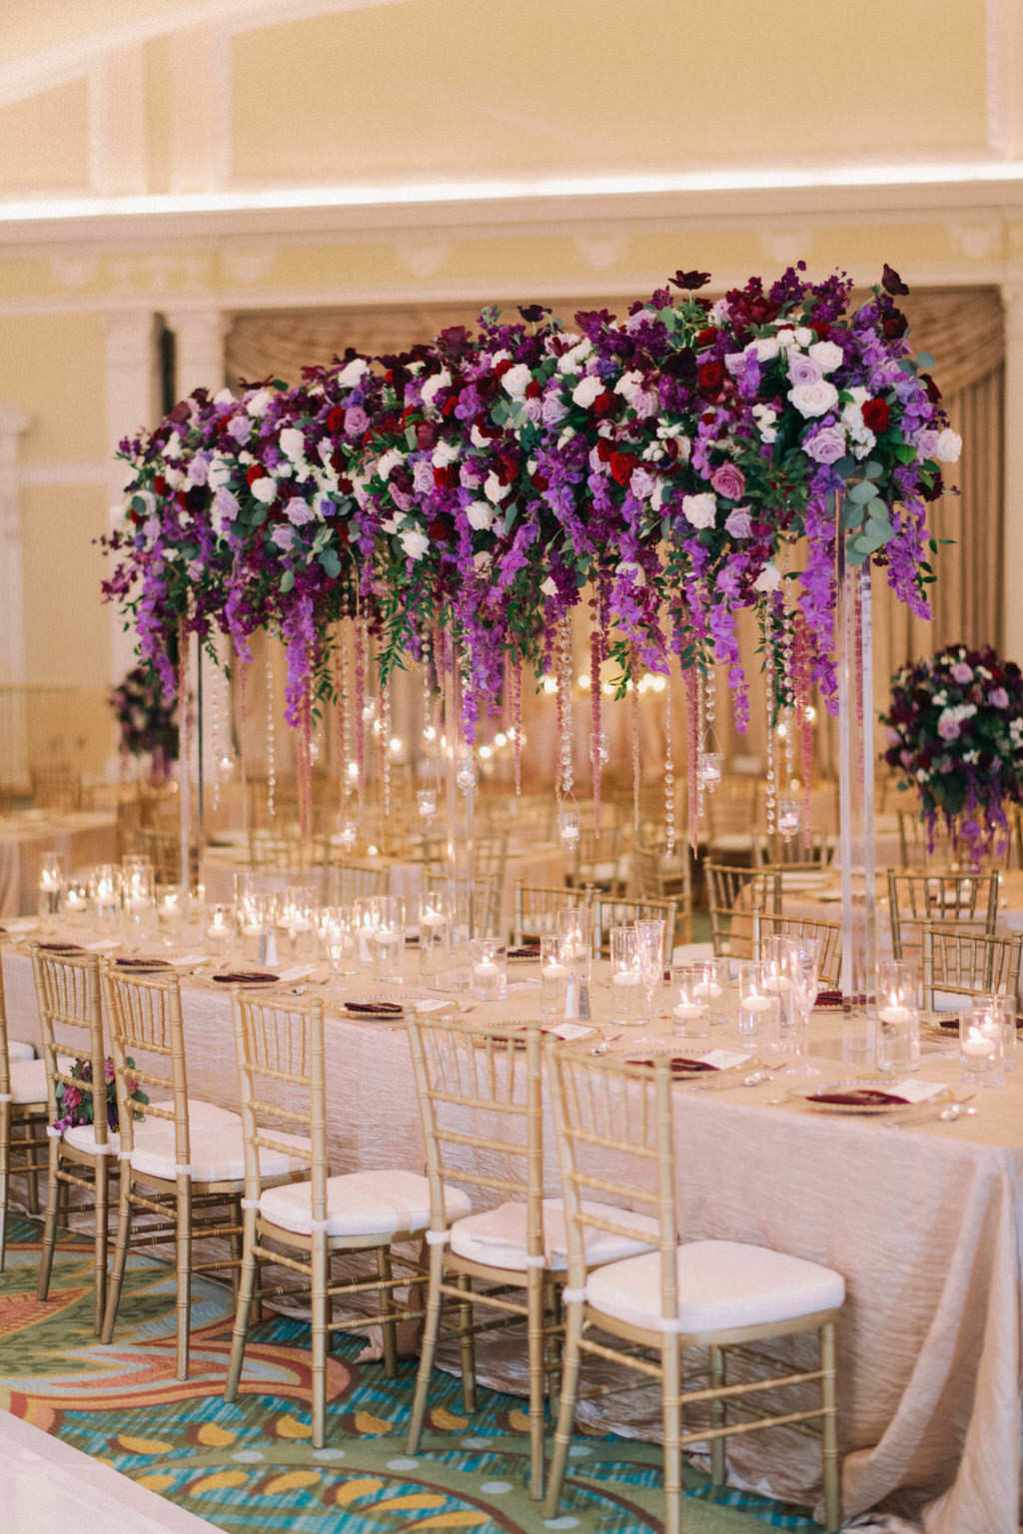 Elegant, Extravagant Wedding Reception Decor Portrait, Long Table with Gold Linen, Gold Chiavari Chairs, Tall Purple, Plum, Lilac, Red Greenery and Purple Hanging Amaranthus Floral Centerpiece | Downtown St. Pete Hotel Ballroom Wedding Venue The Vinoy Renaissance